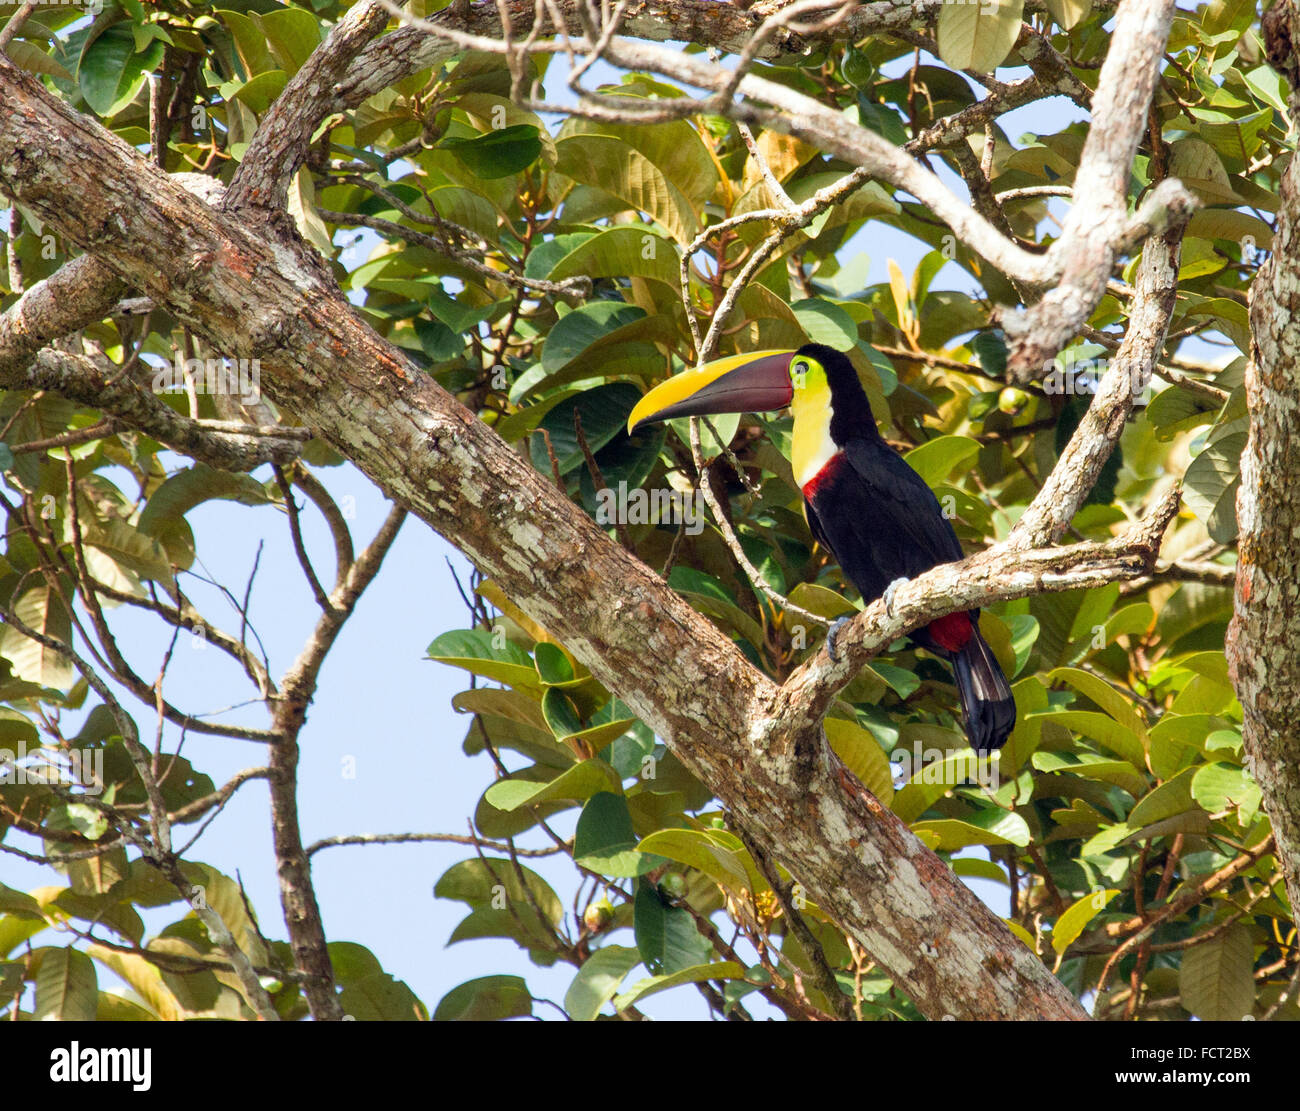 Toucan from Costa Rica Stock Photo